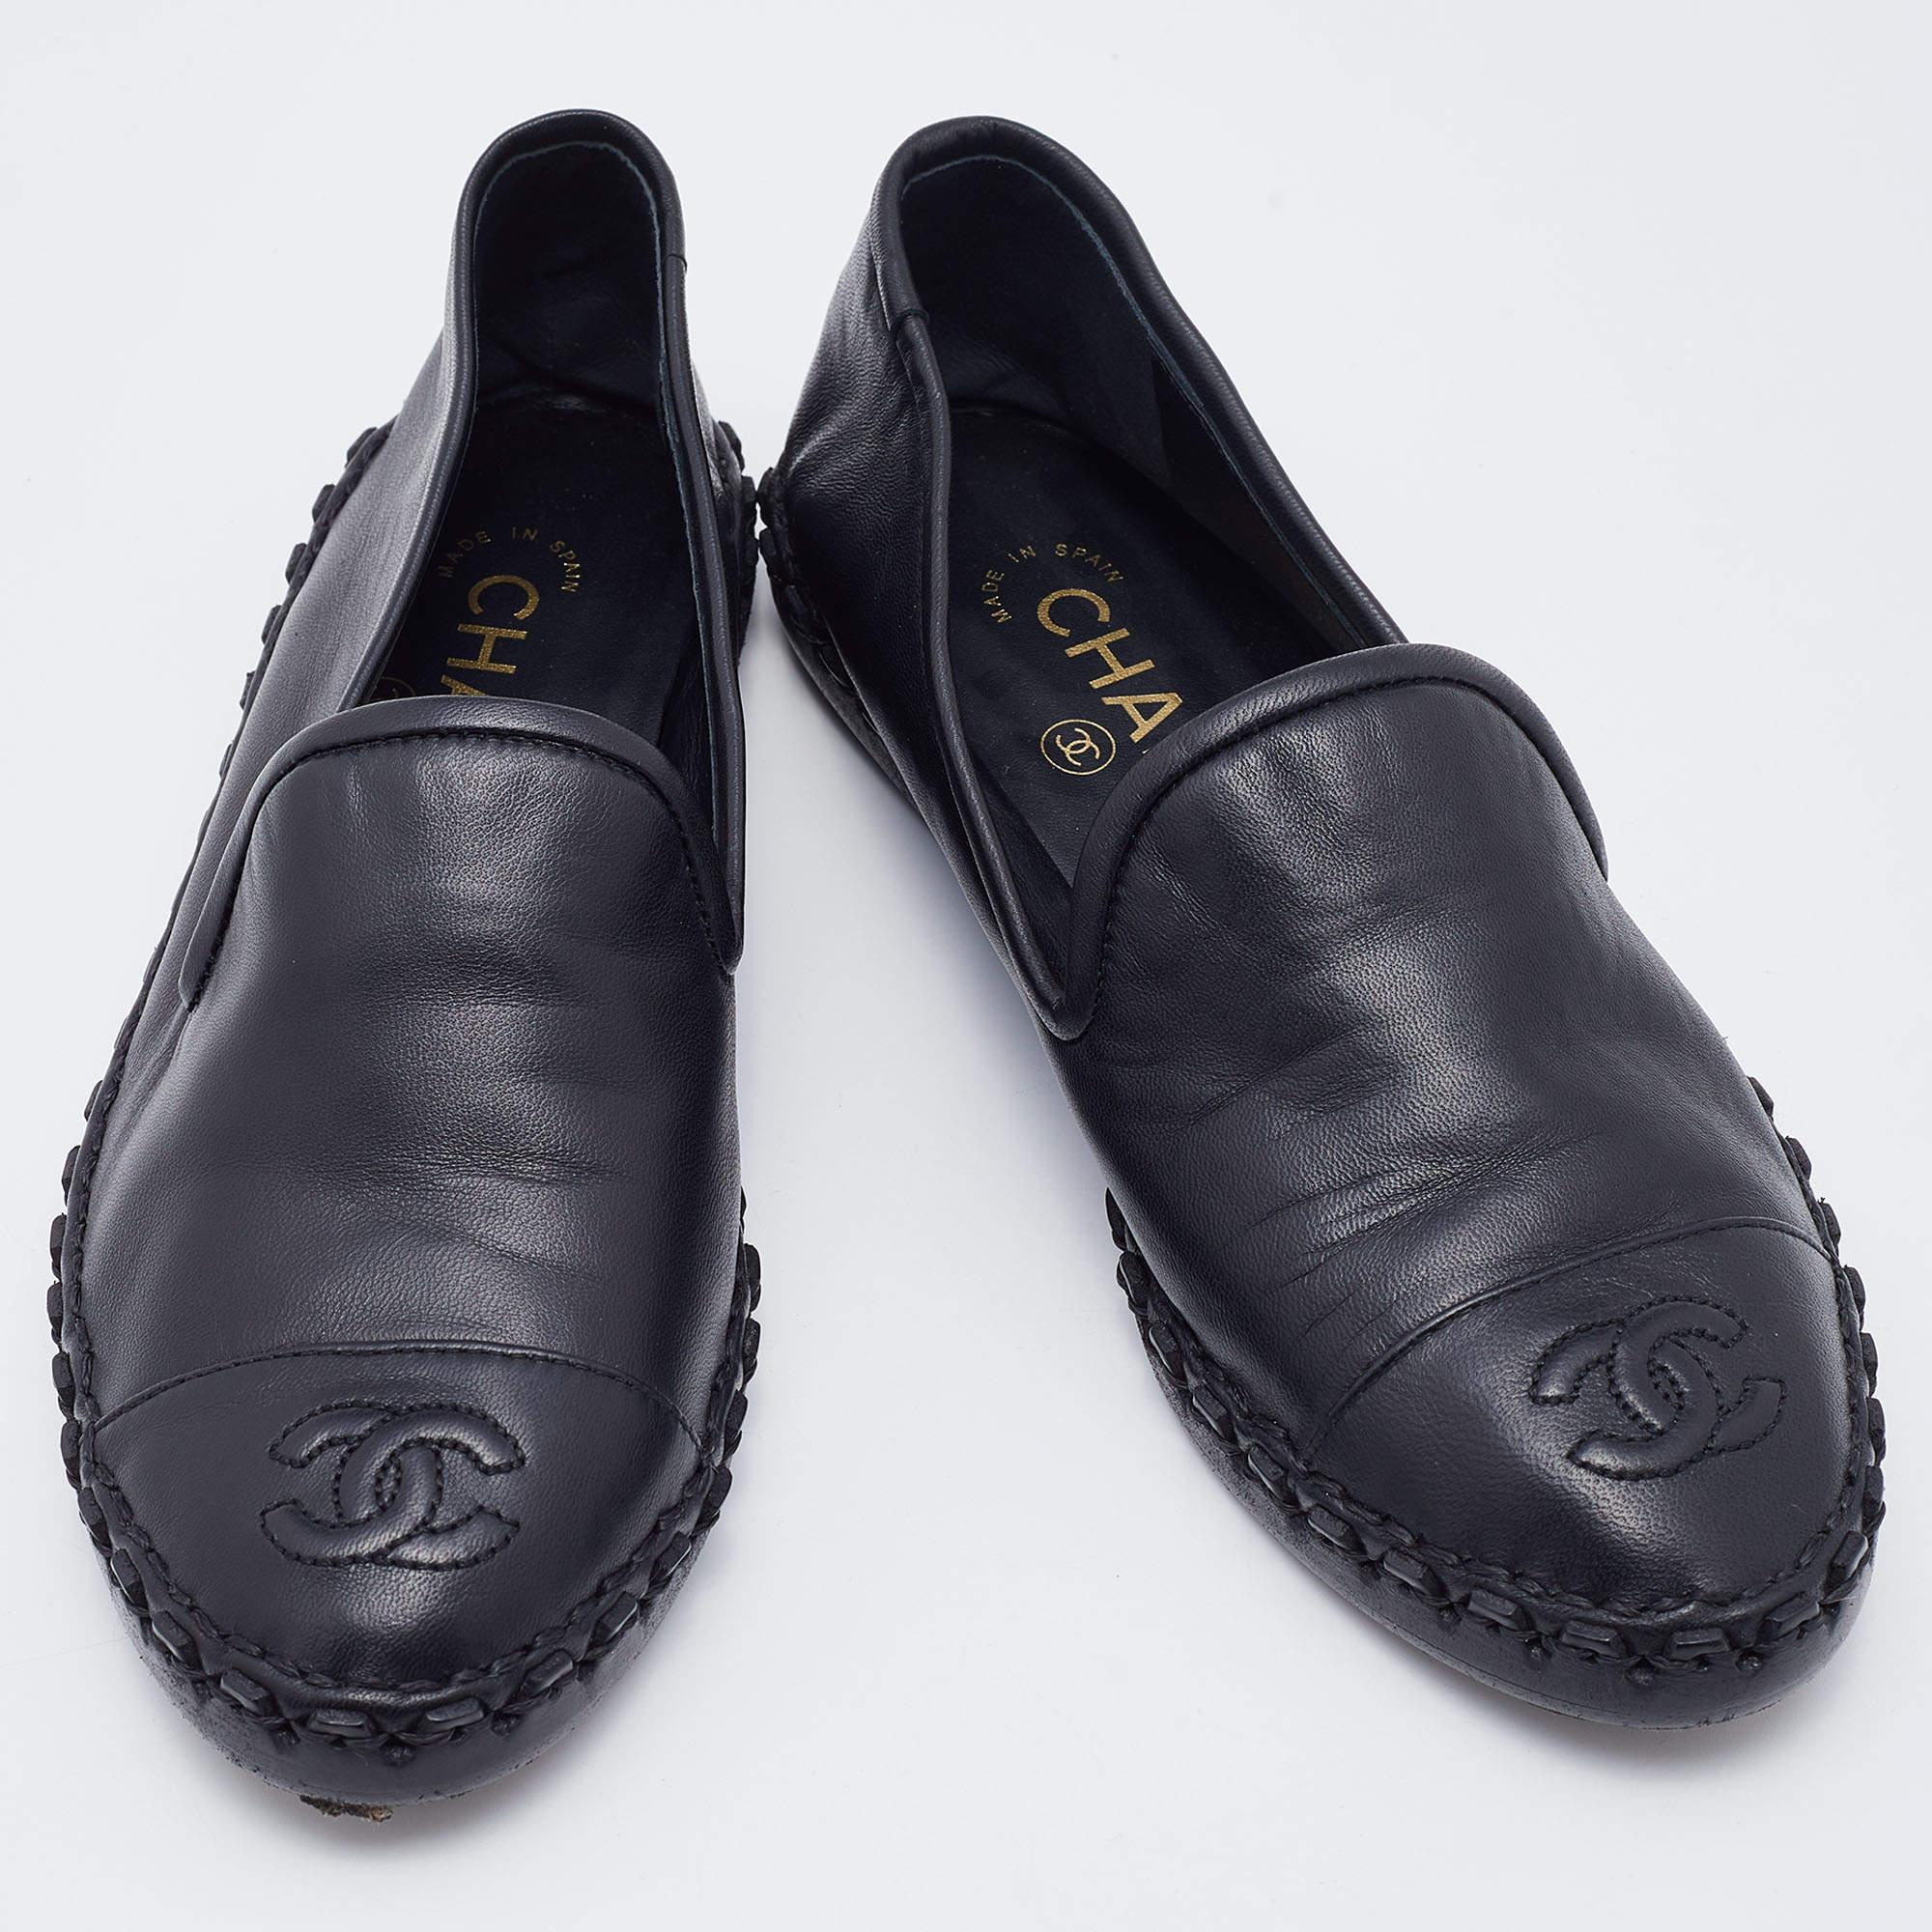 Chanel Black Leather CC Cap Toe Smoking Slippers Size 35 1